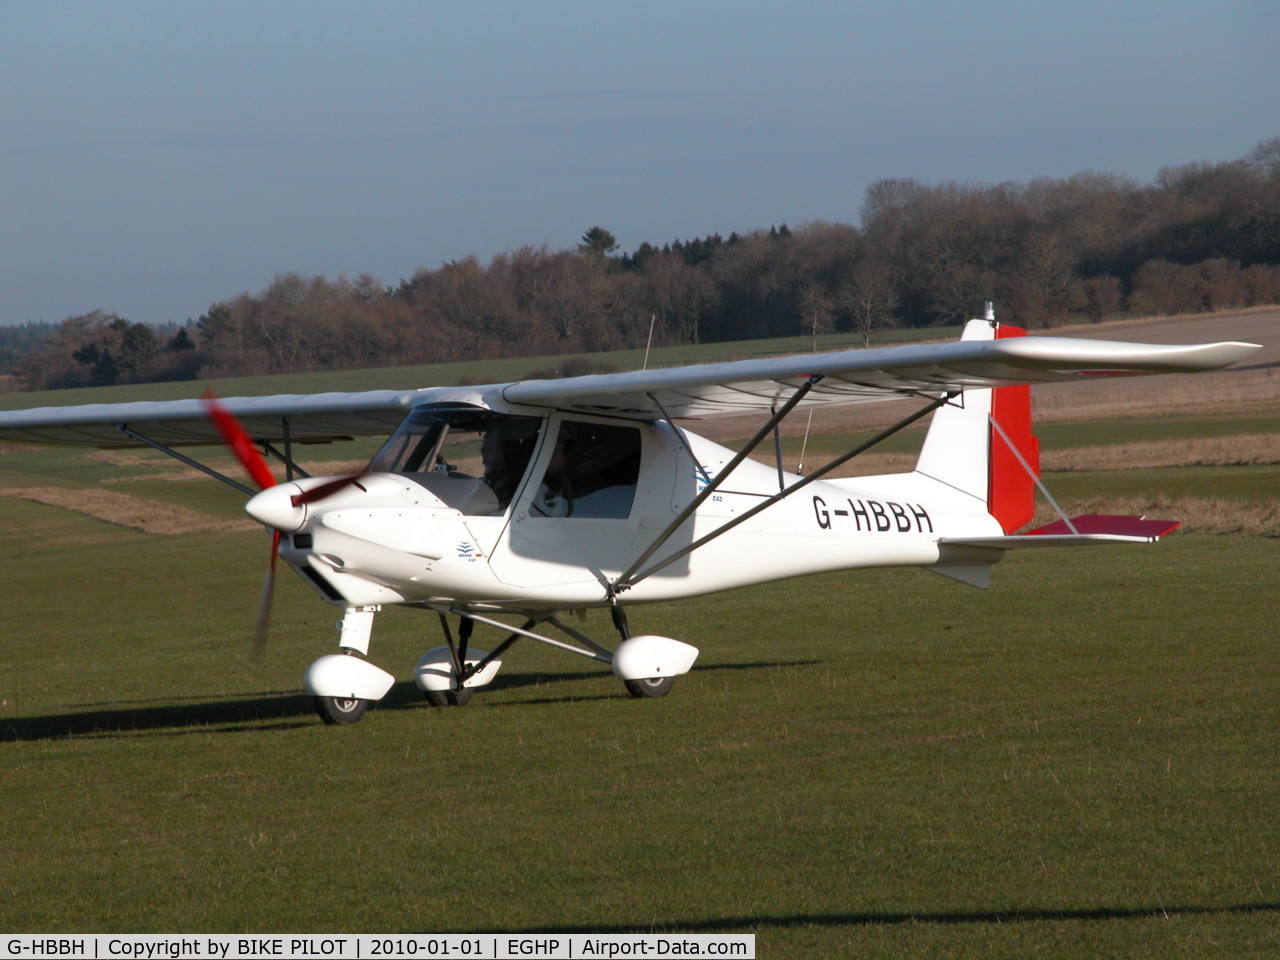 G-HBBH, 2006 Comco Ikarus C42 FB100 C/N 0608-6835, NEW YEARS DAY FLY-IN